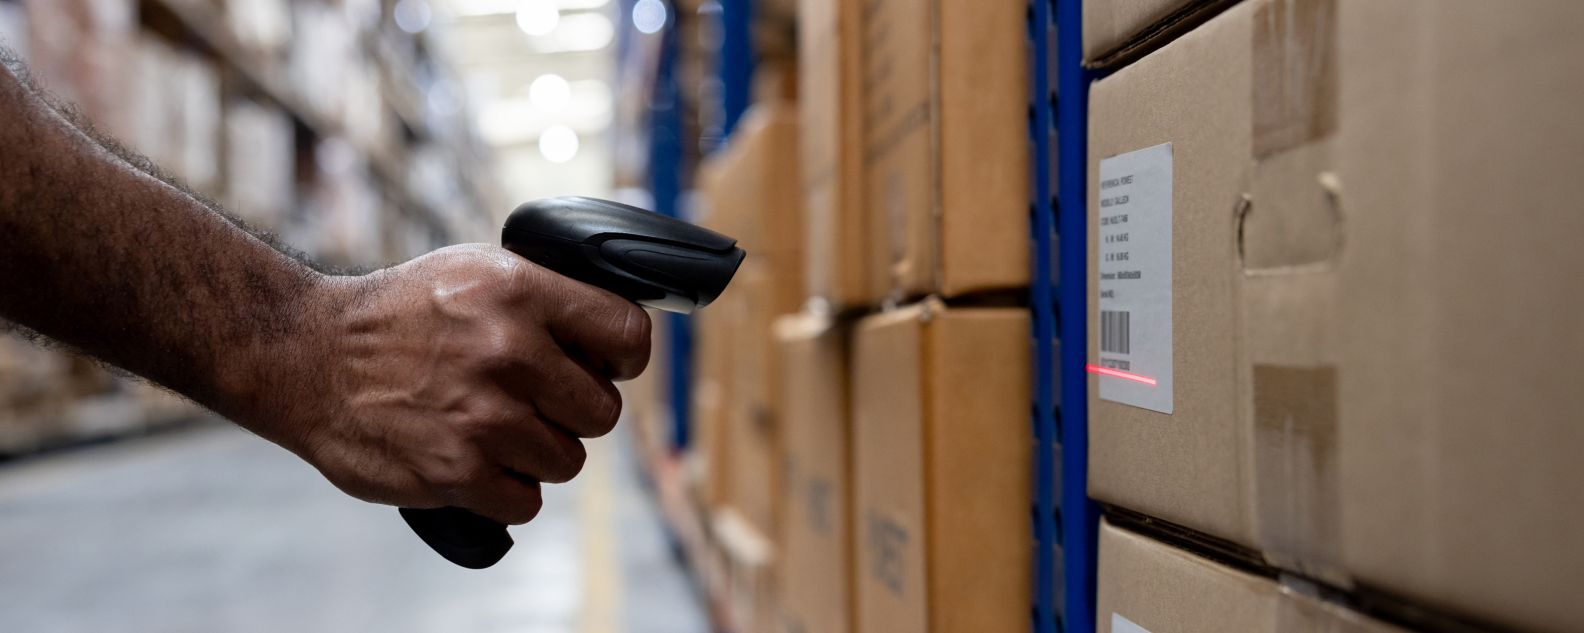 A hand scans packages in a warehouse